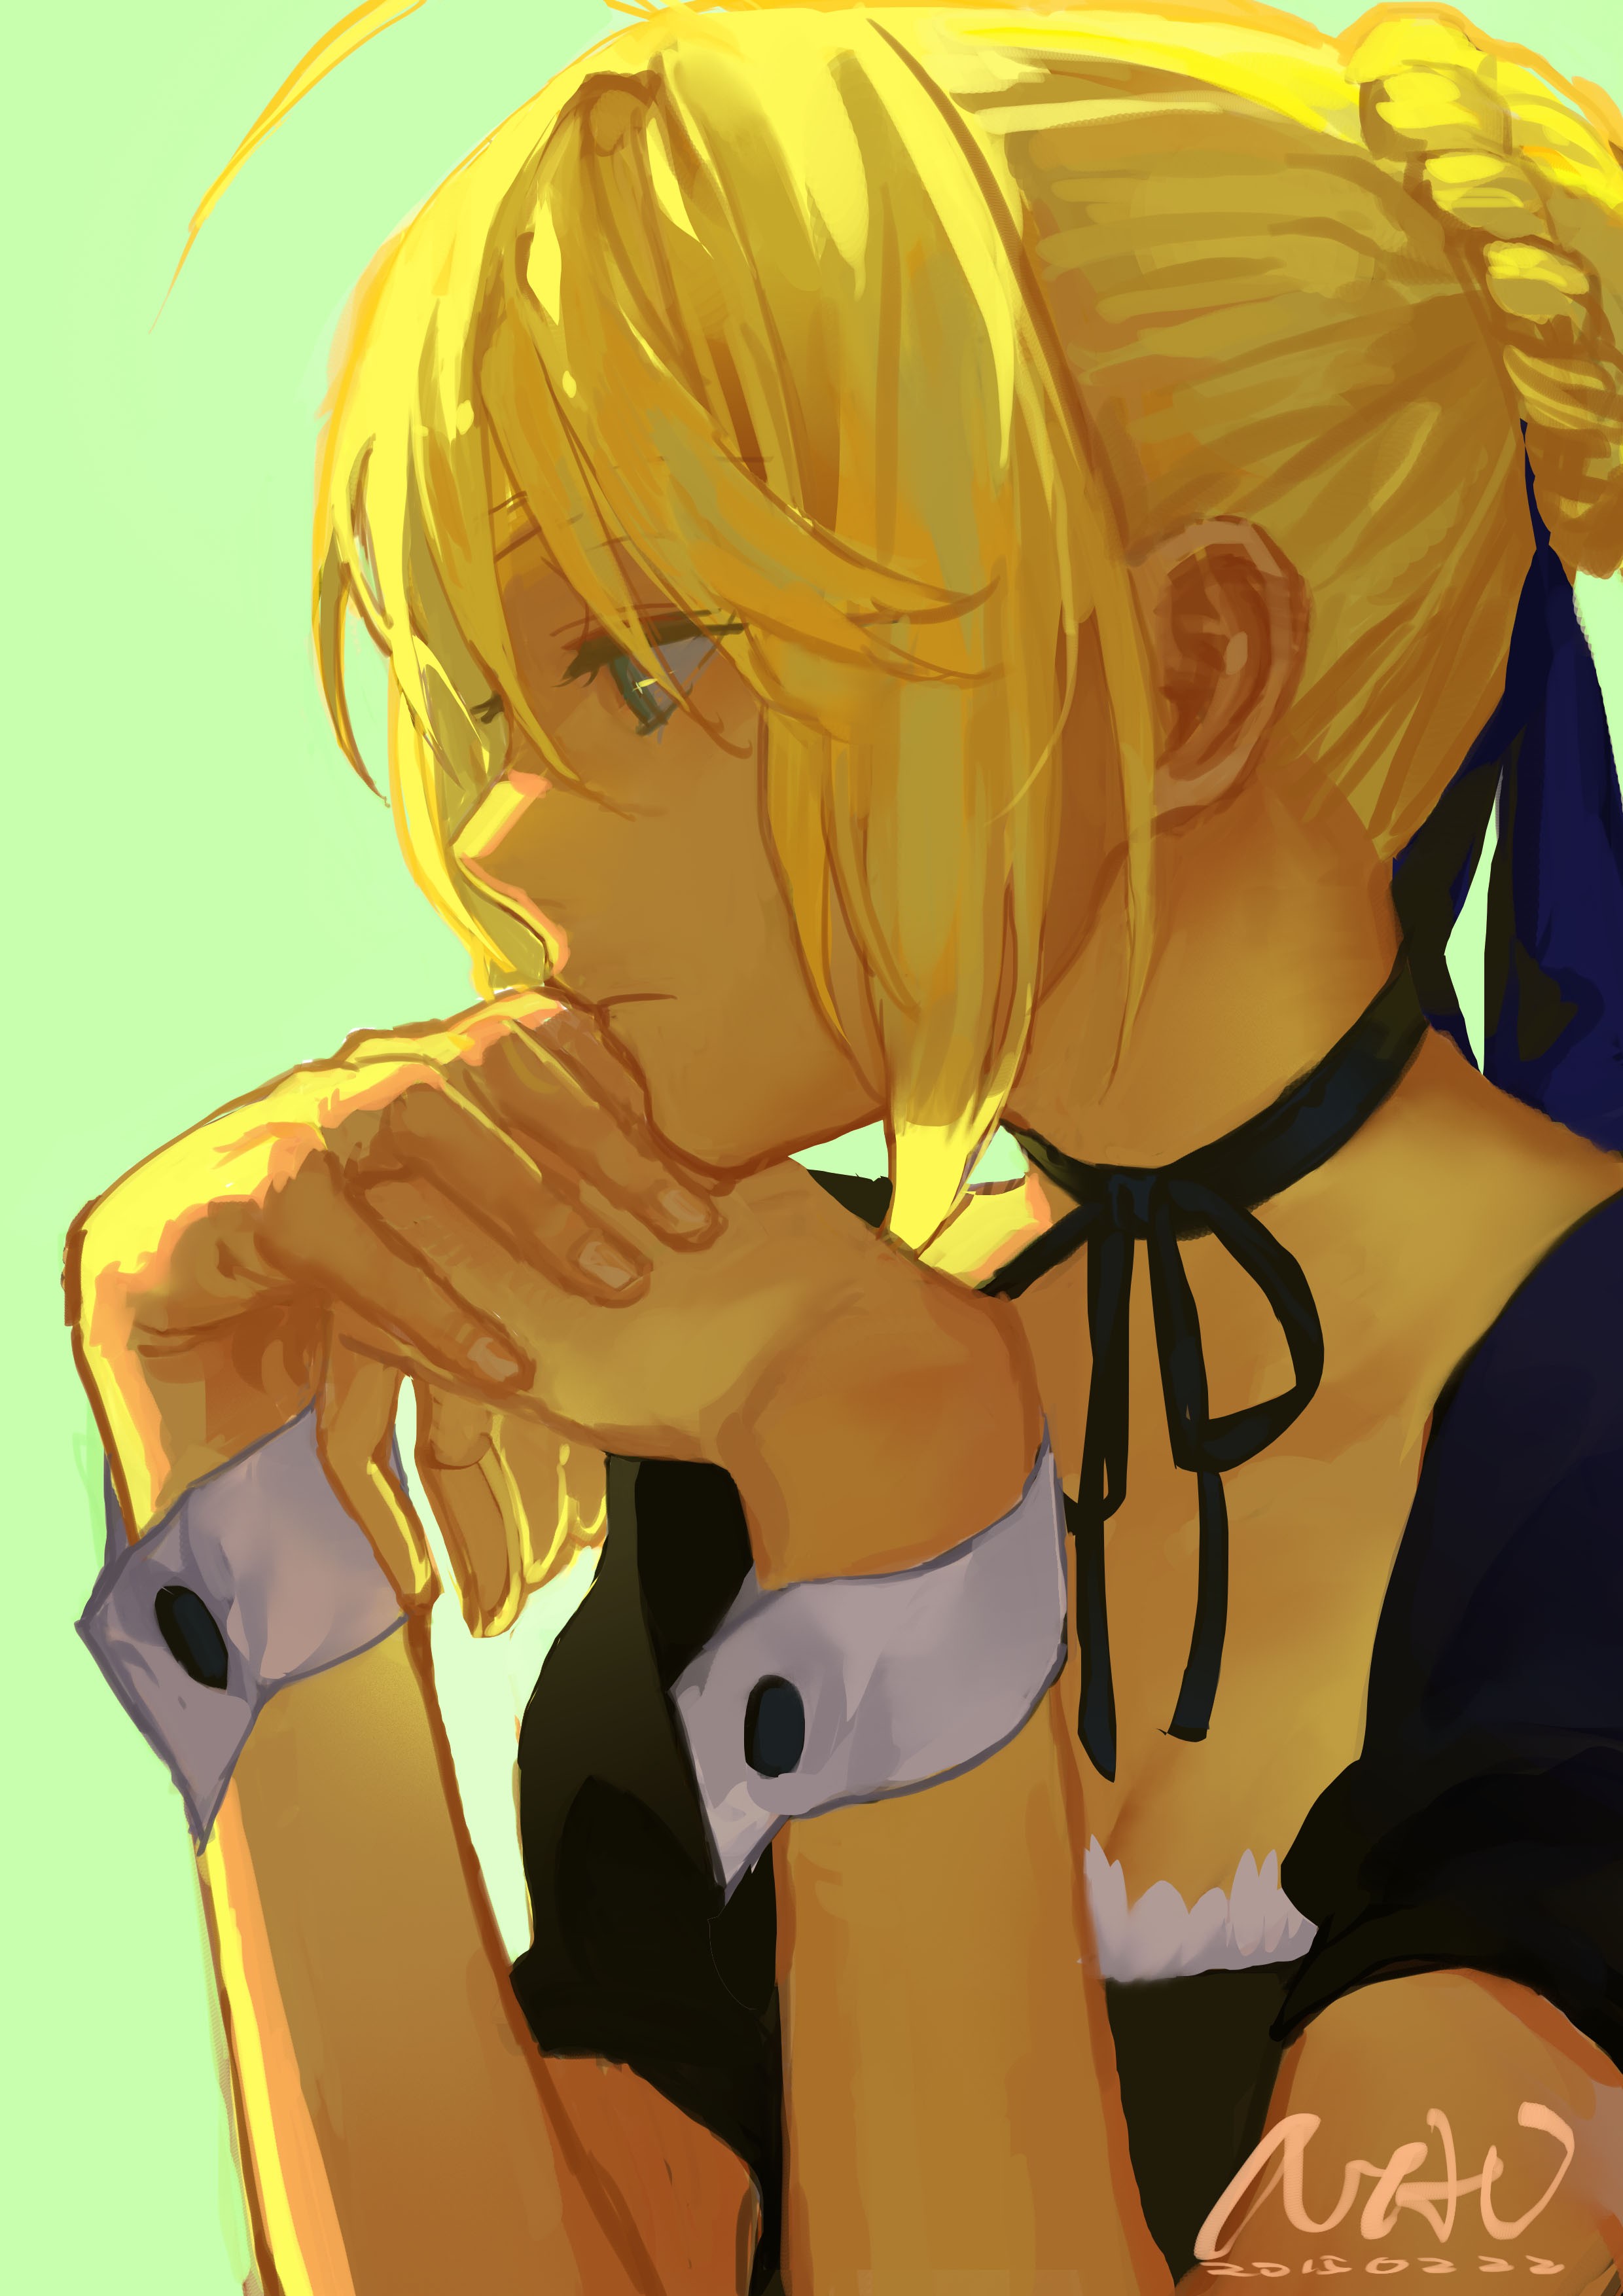 Anime 2480x3508 Fate/Stay Night Fate series Saber blonde anime girls maid outfit anime looking away